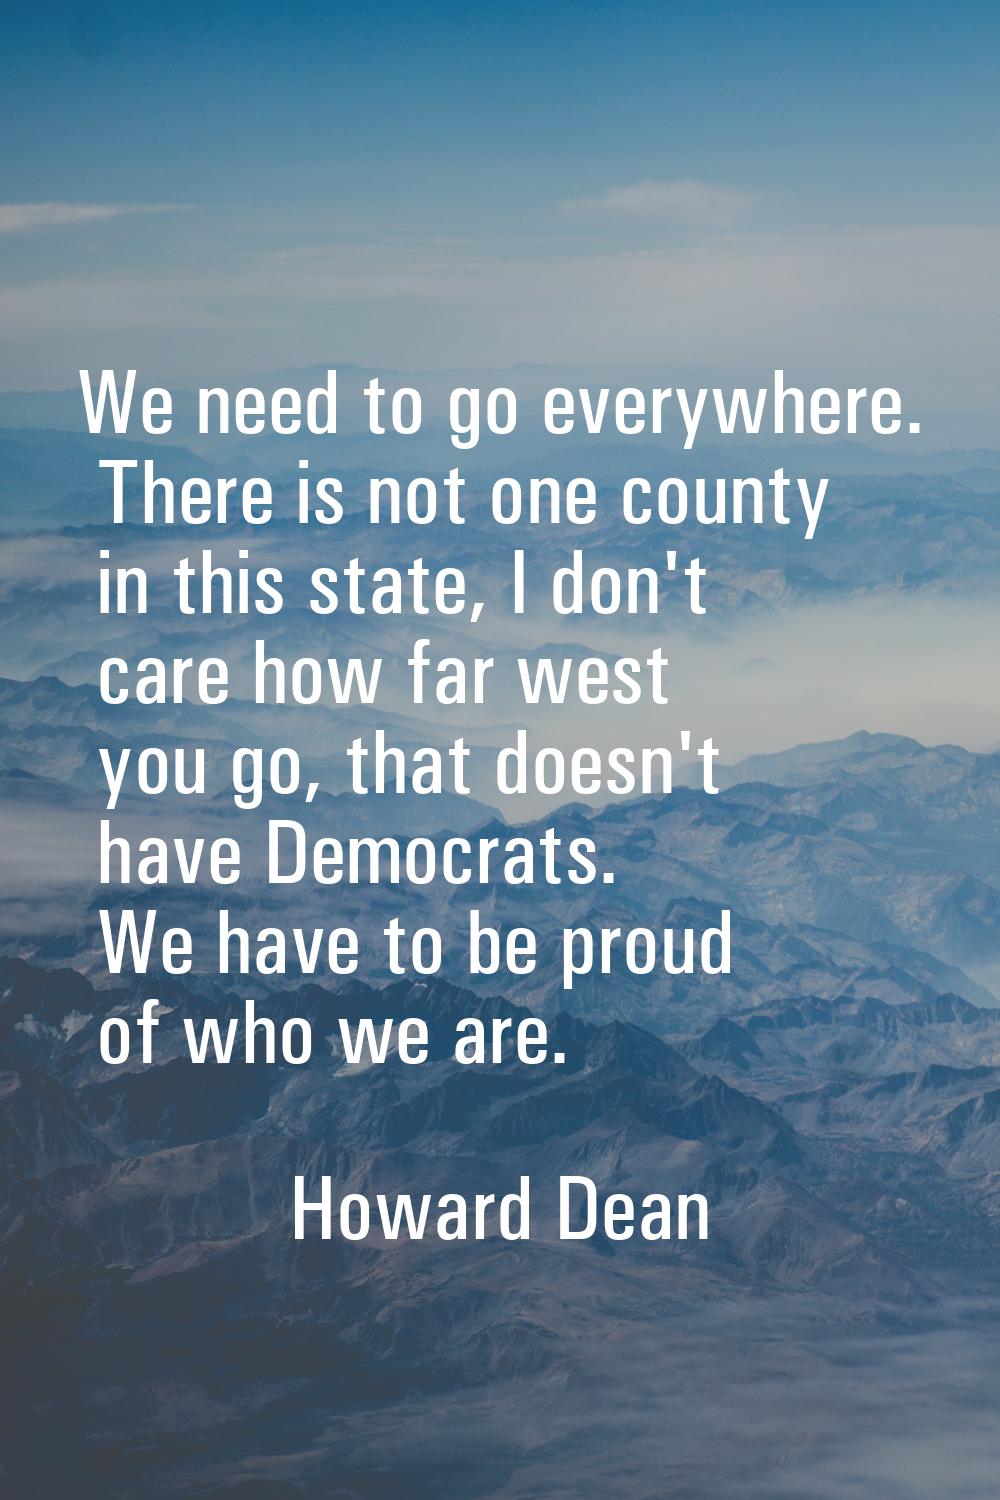 We need to go everywhere. There is not one county in this state, I don't care how far west you go, 